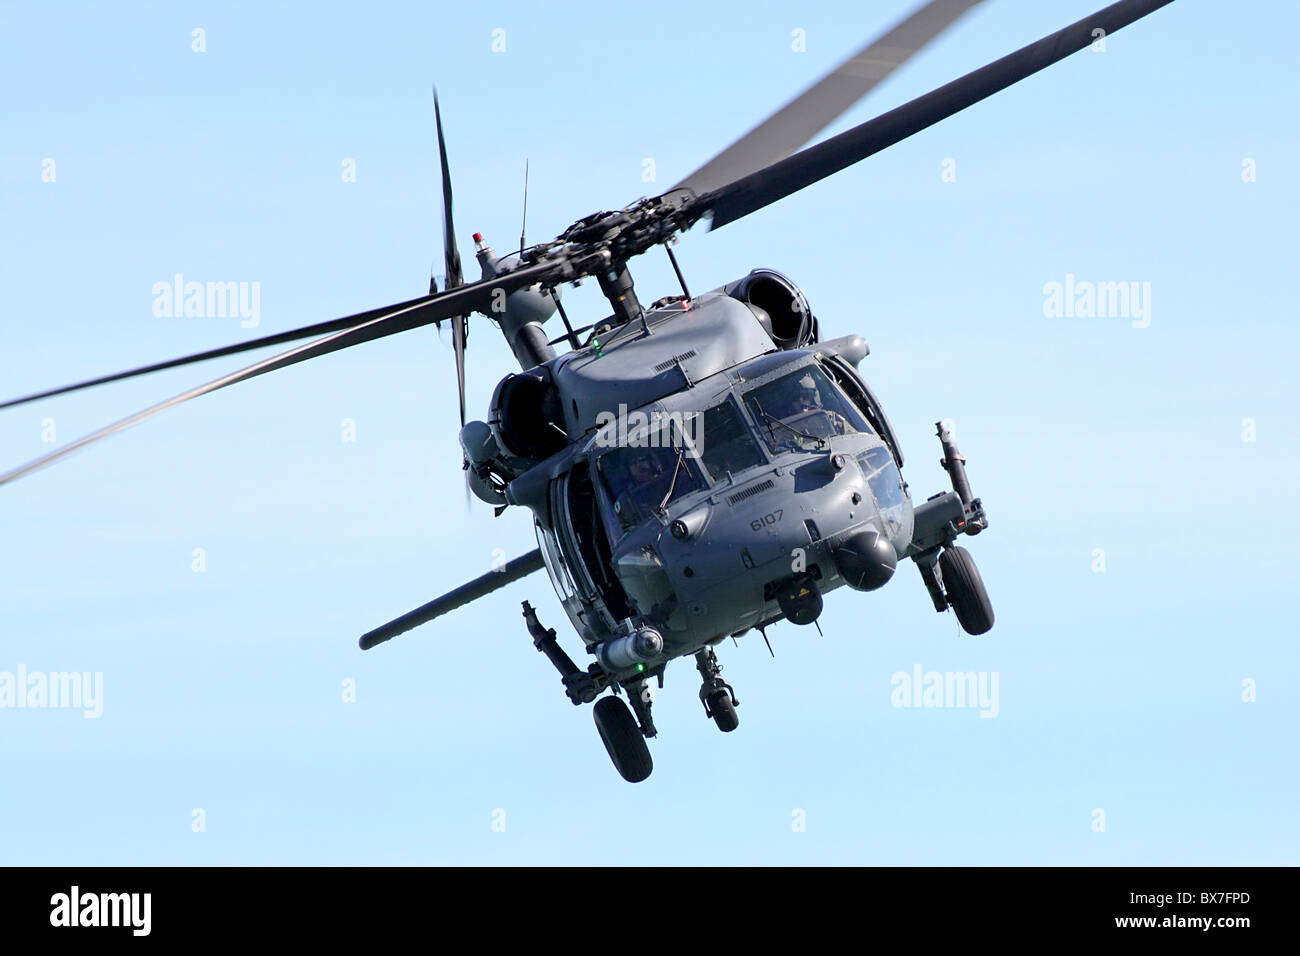 MH-60G Blackhawk CSAR Combat Search & Rescue helicopter in flight during the 2010 San Francisco Fleet Week Airshow. Stock Photo